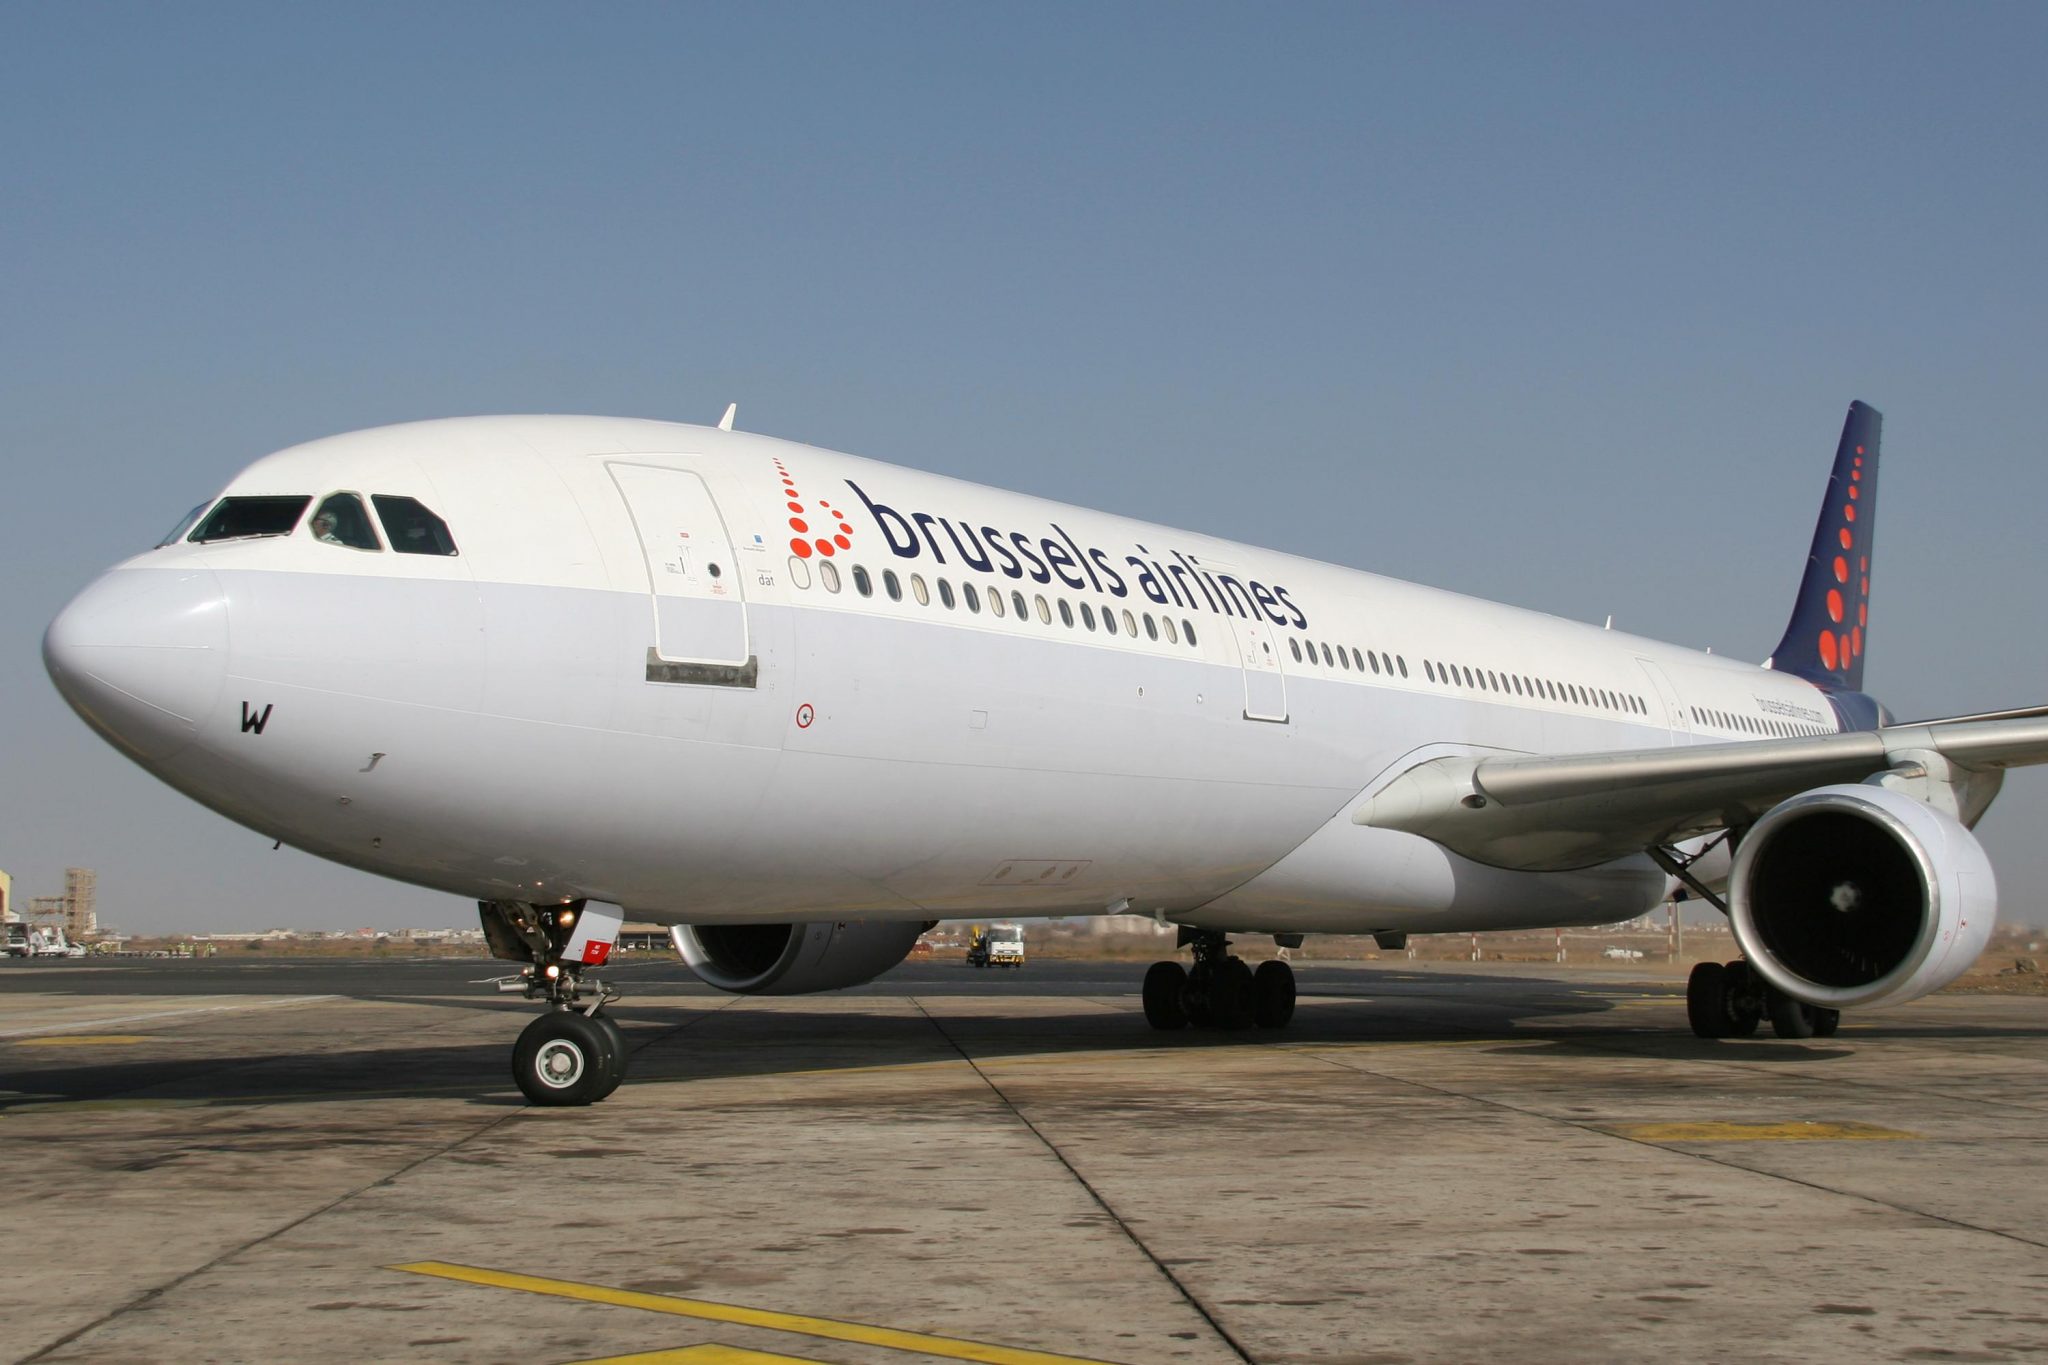 Brussels Airlines to launch flights to Montreal in 2020